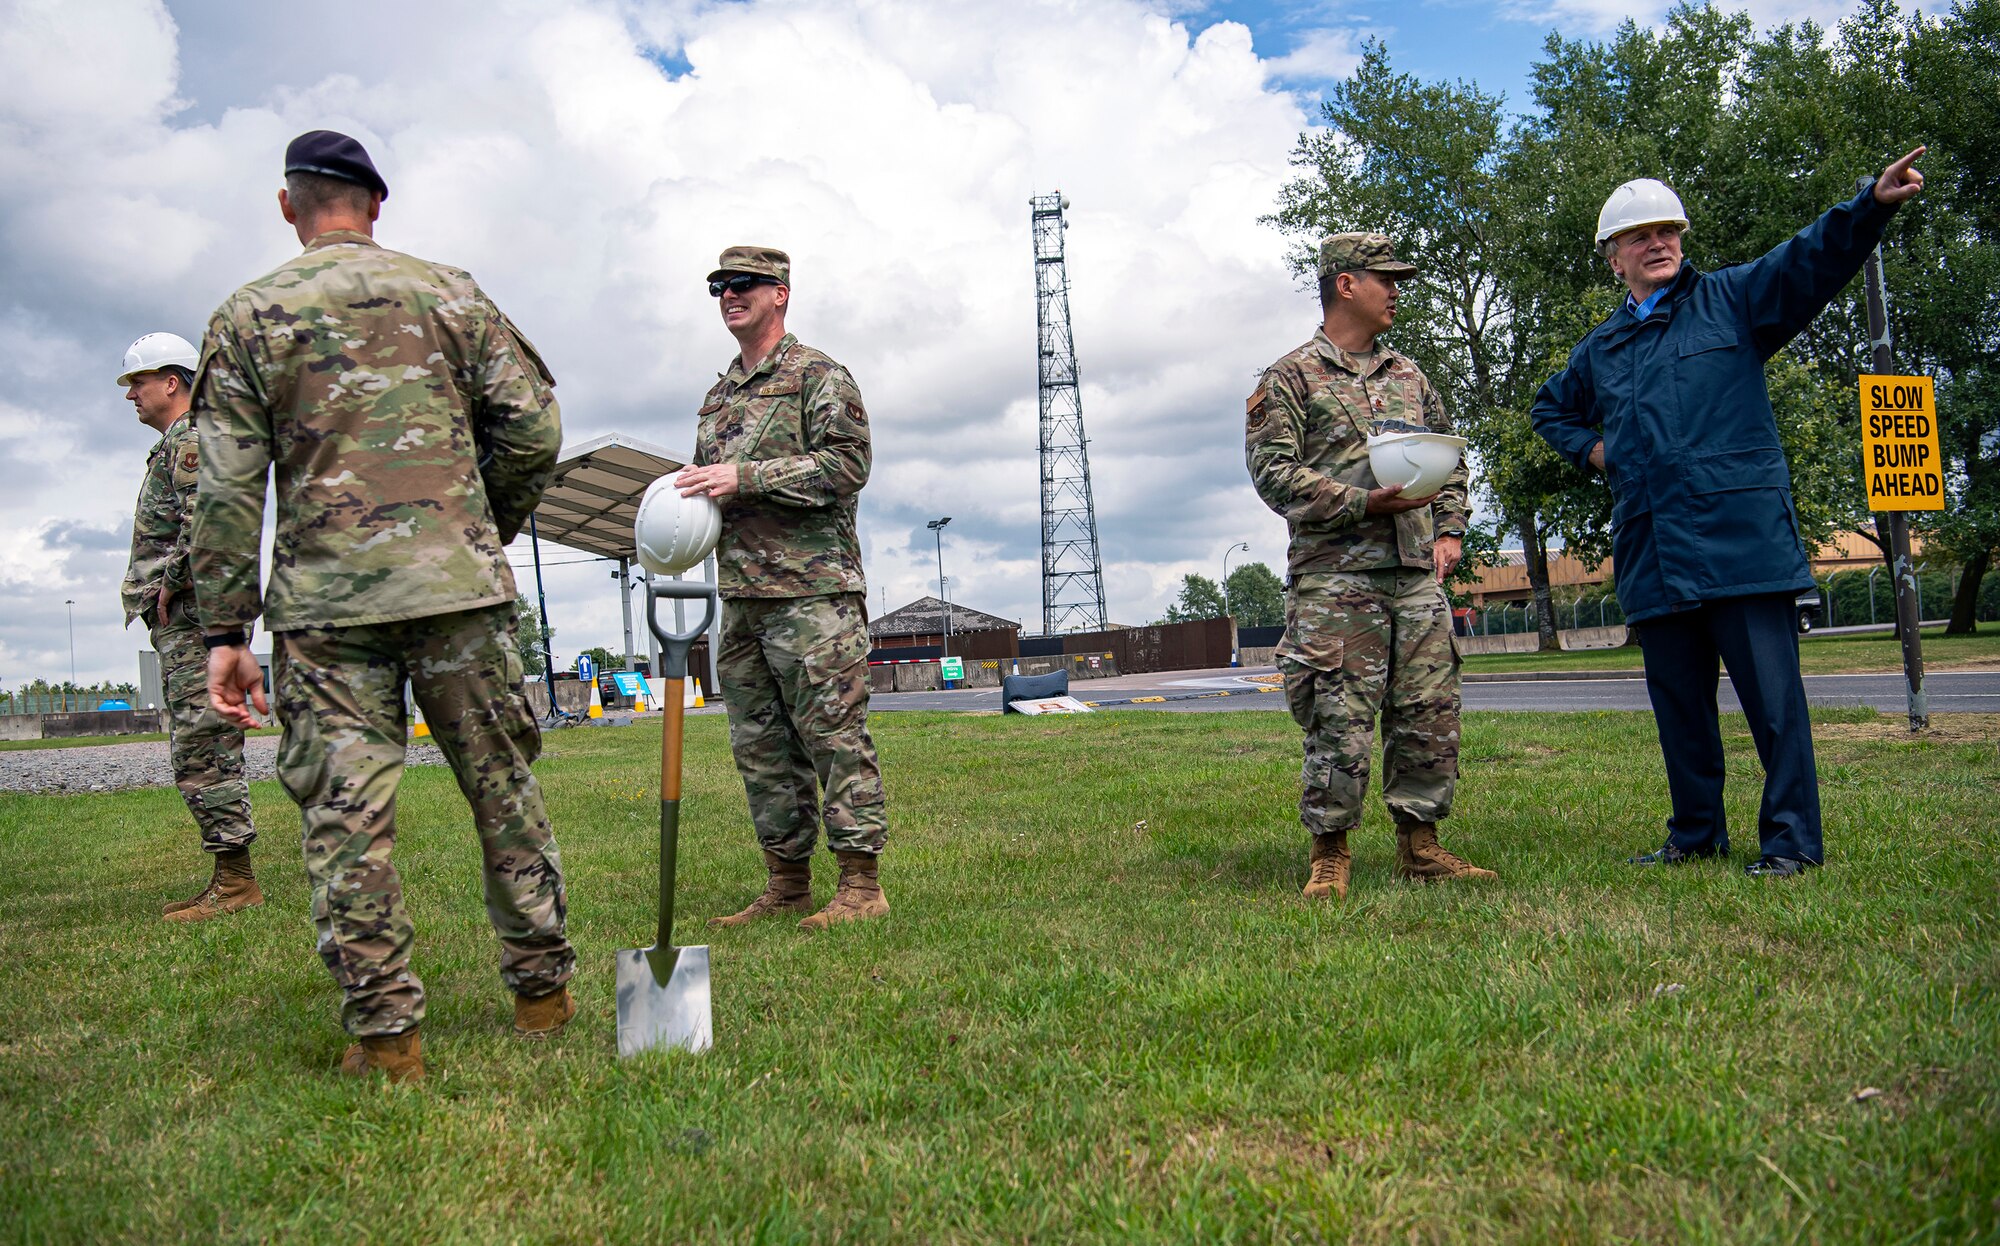 Royal Air Force Squadron Leader Clive Wood (right), RAF Alconbury and RAF Molesworth commander, speaks with U.S. Air Force Maj. Chin Hsu (center right), 423d Civil Engineer Squadron commander, about a construction project for the main gate at RAF Alconbury, England, July 2, 2020. Construction will commence on July 6, 2020 and effective from that date, installation entry and exit procedures will be modified to support the construction project. This project will provide a large vehicle inspection station, channelized traffic flow for better security and improved safety for personnel. (U.S. Air Force photo by Senior Airman Eugene Oliver)